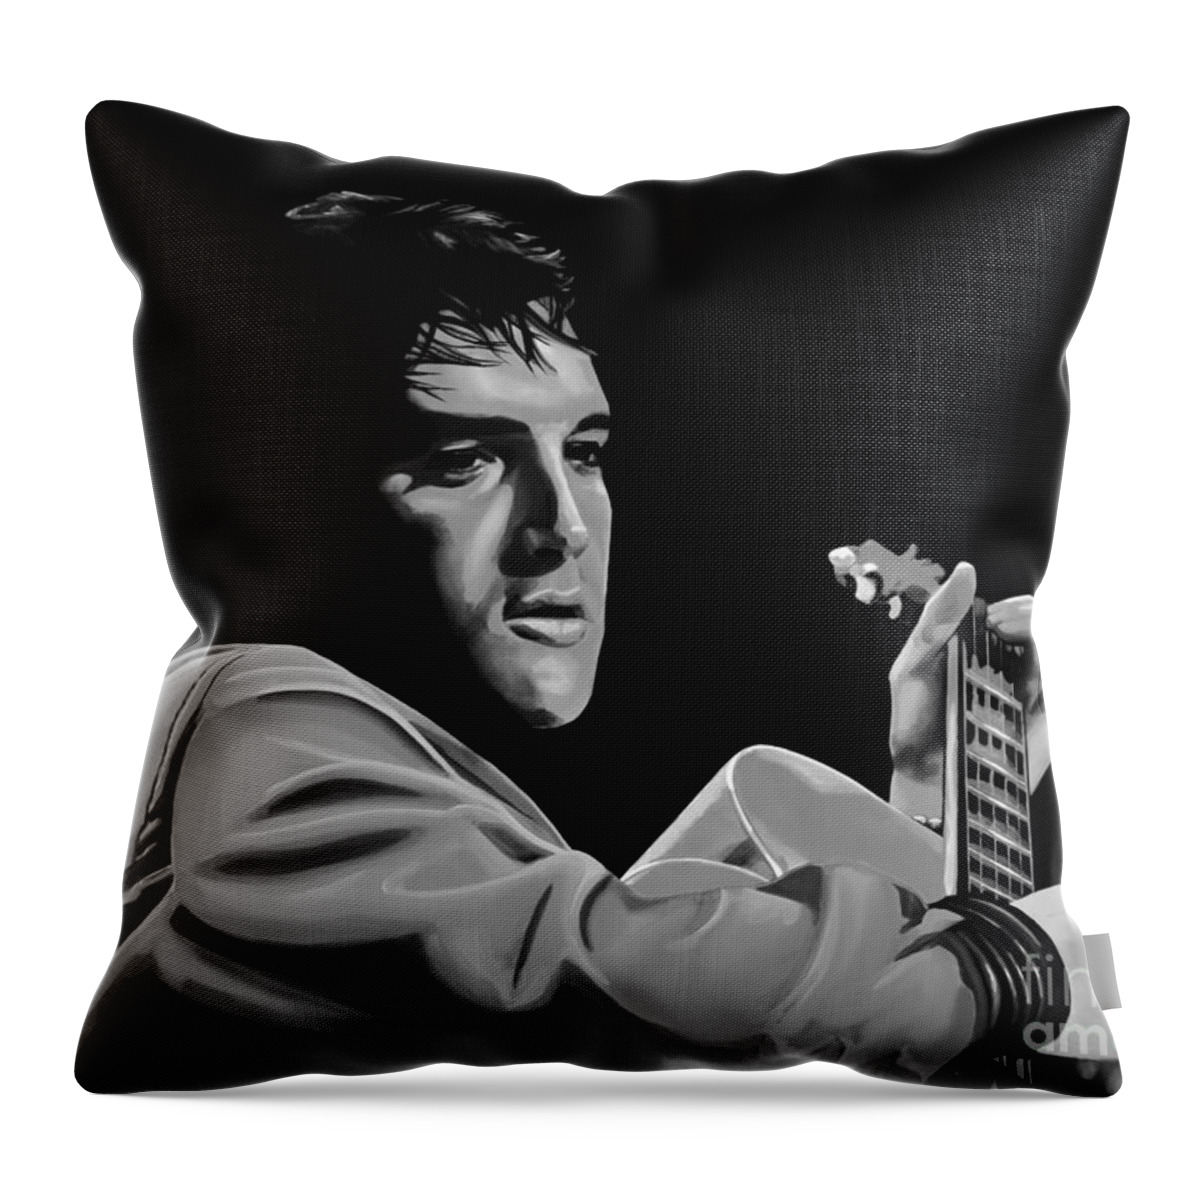 Elvis Throw Pillow featuring the mixed media Elvis Presley by Meijering Manupix